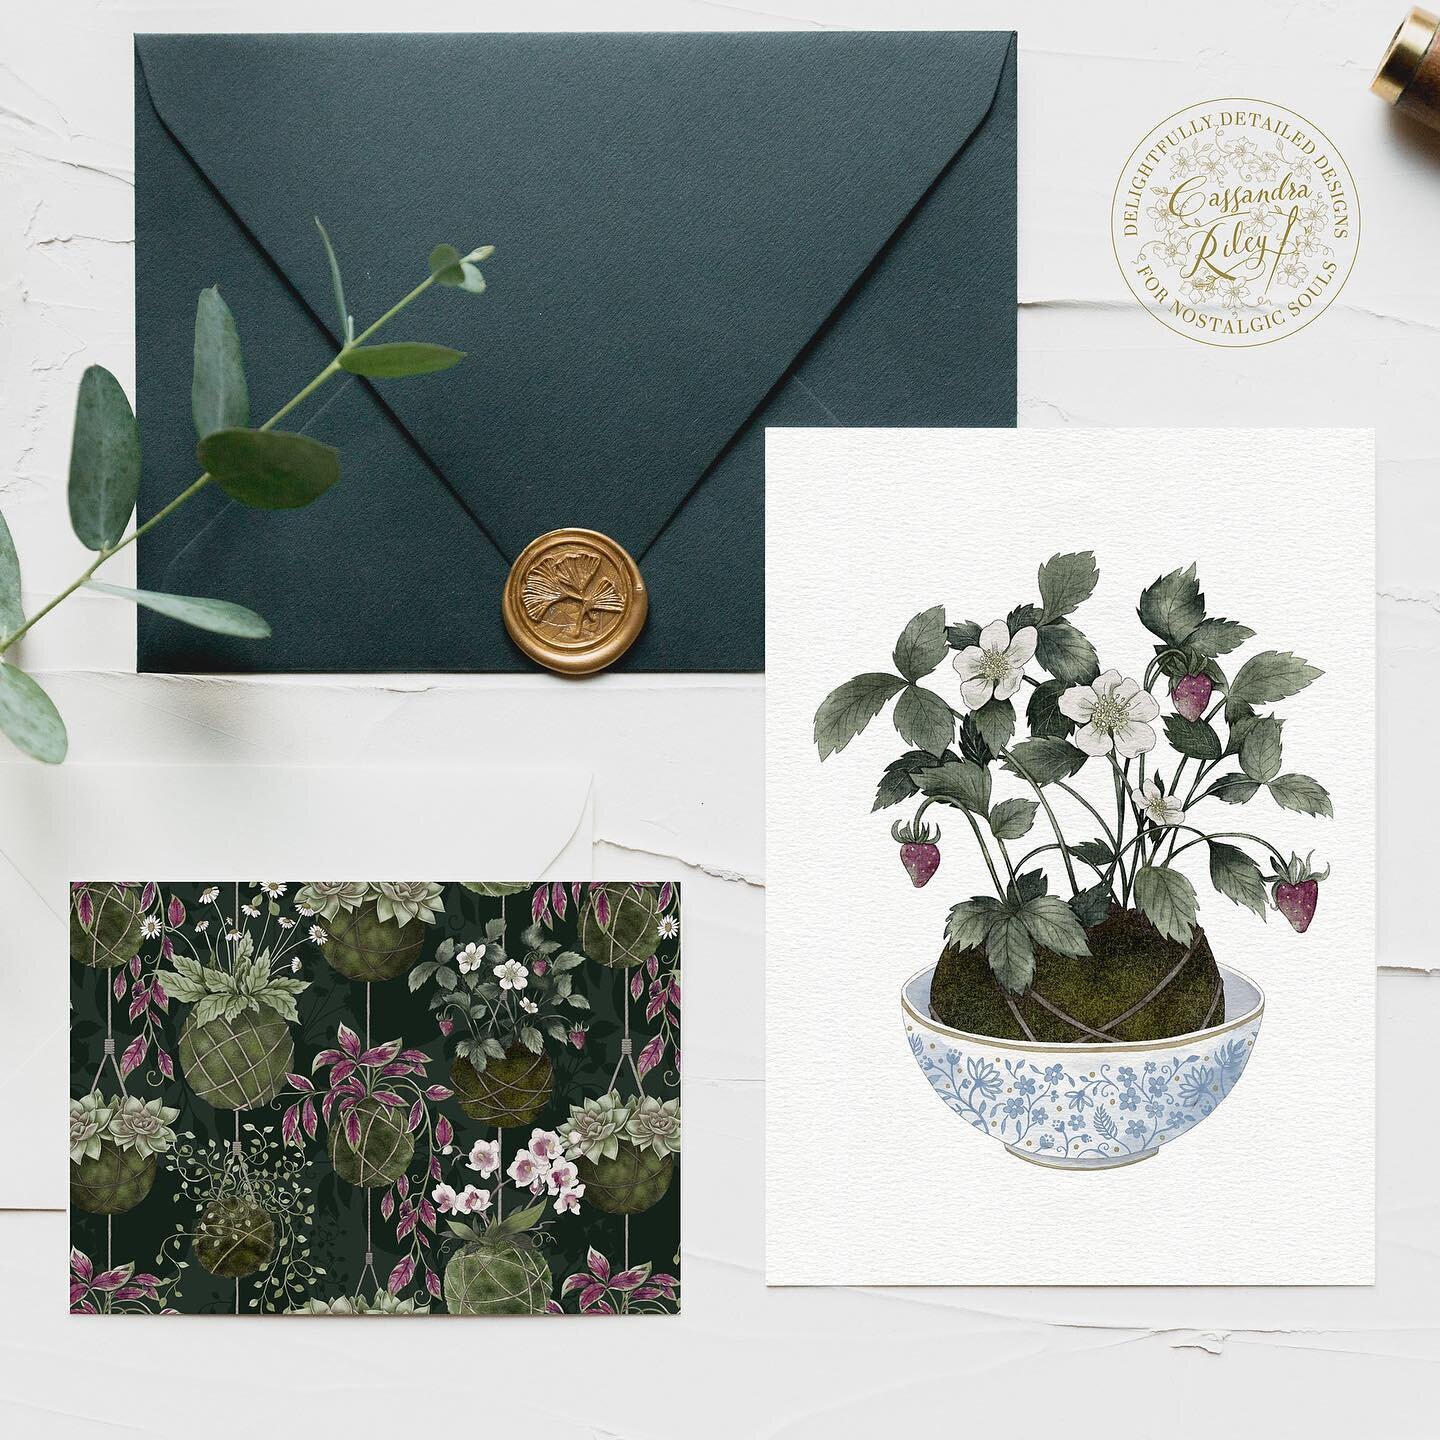 Happy Friday! Thank you to everyone for such amazing feedback  about my Kokedama pattern yesterday. 
My plan for this year is to create more stationery products so it was fun to see how the pattern would look scaled down on a notecard and one of the 